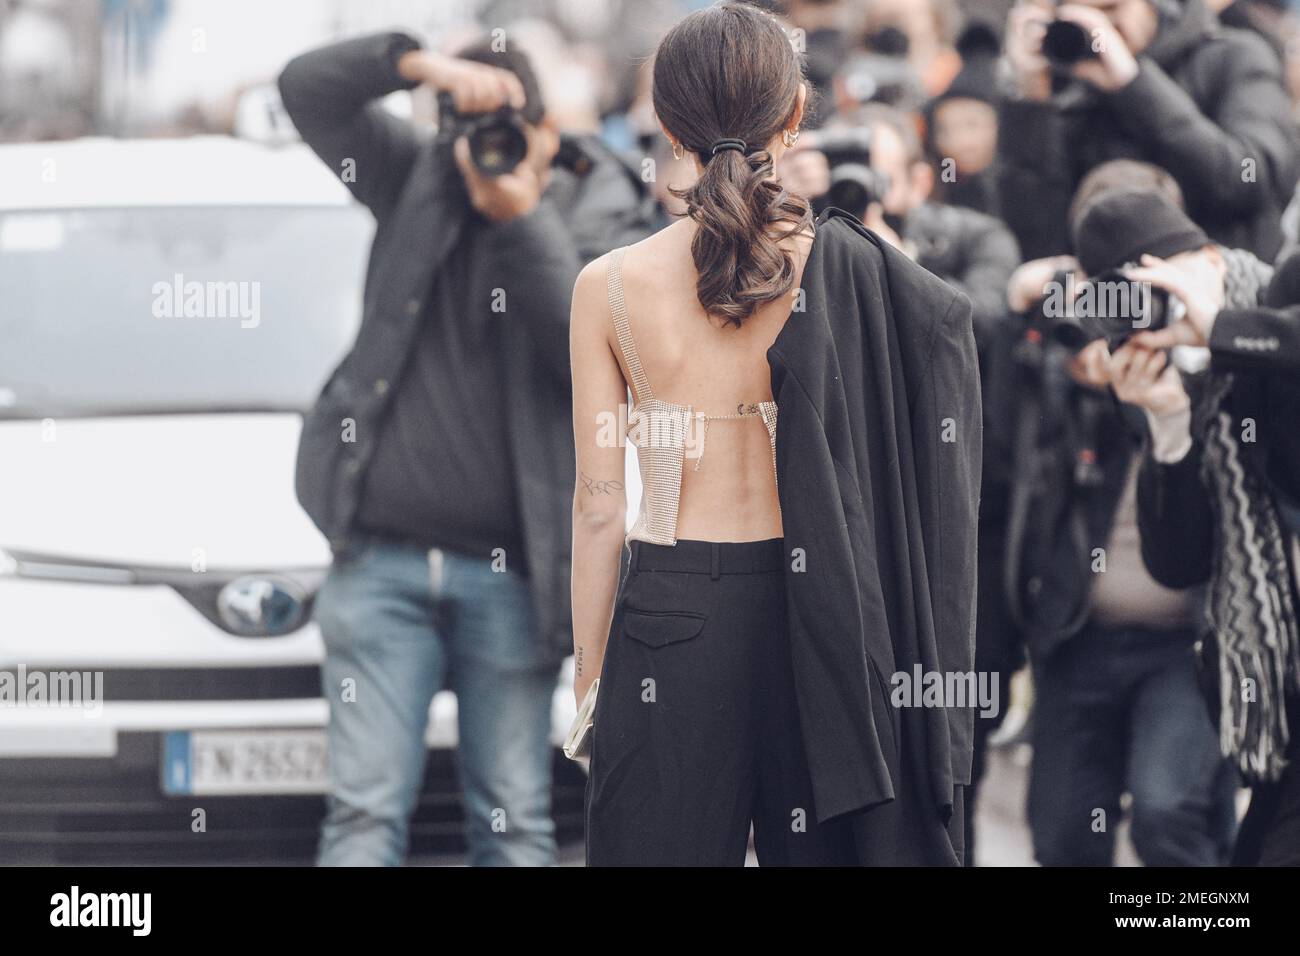 Milan, Italy - February 24, 2022: Back view of female star in top with jacket over shoulder and ponytail standing against paparazzi taking photos Stock Photo